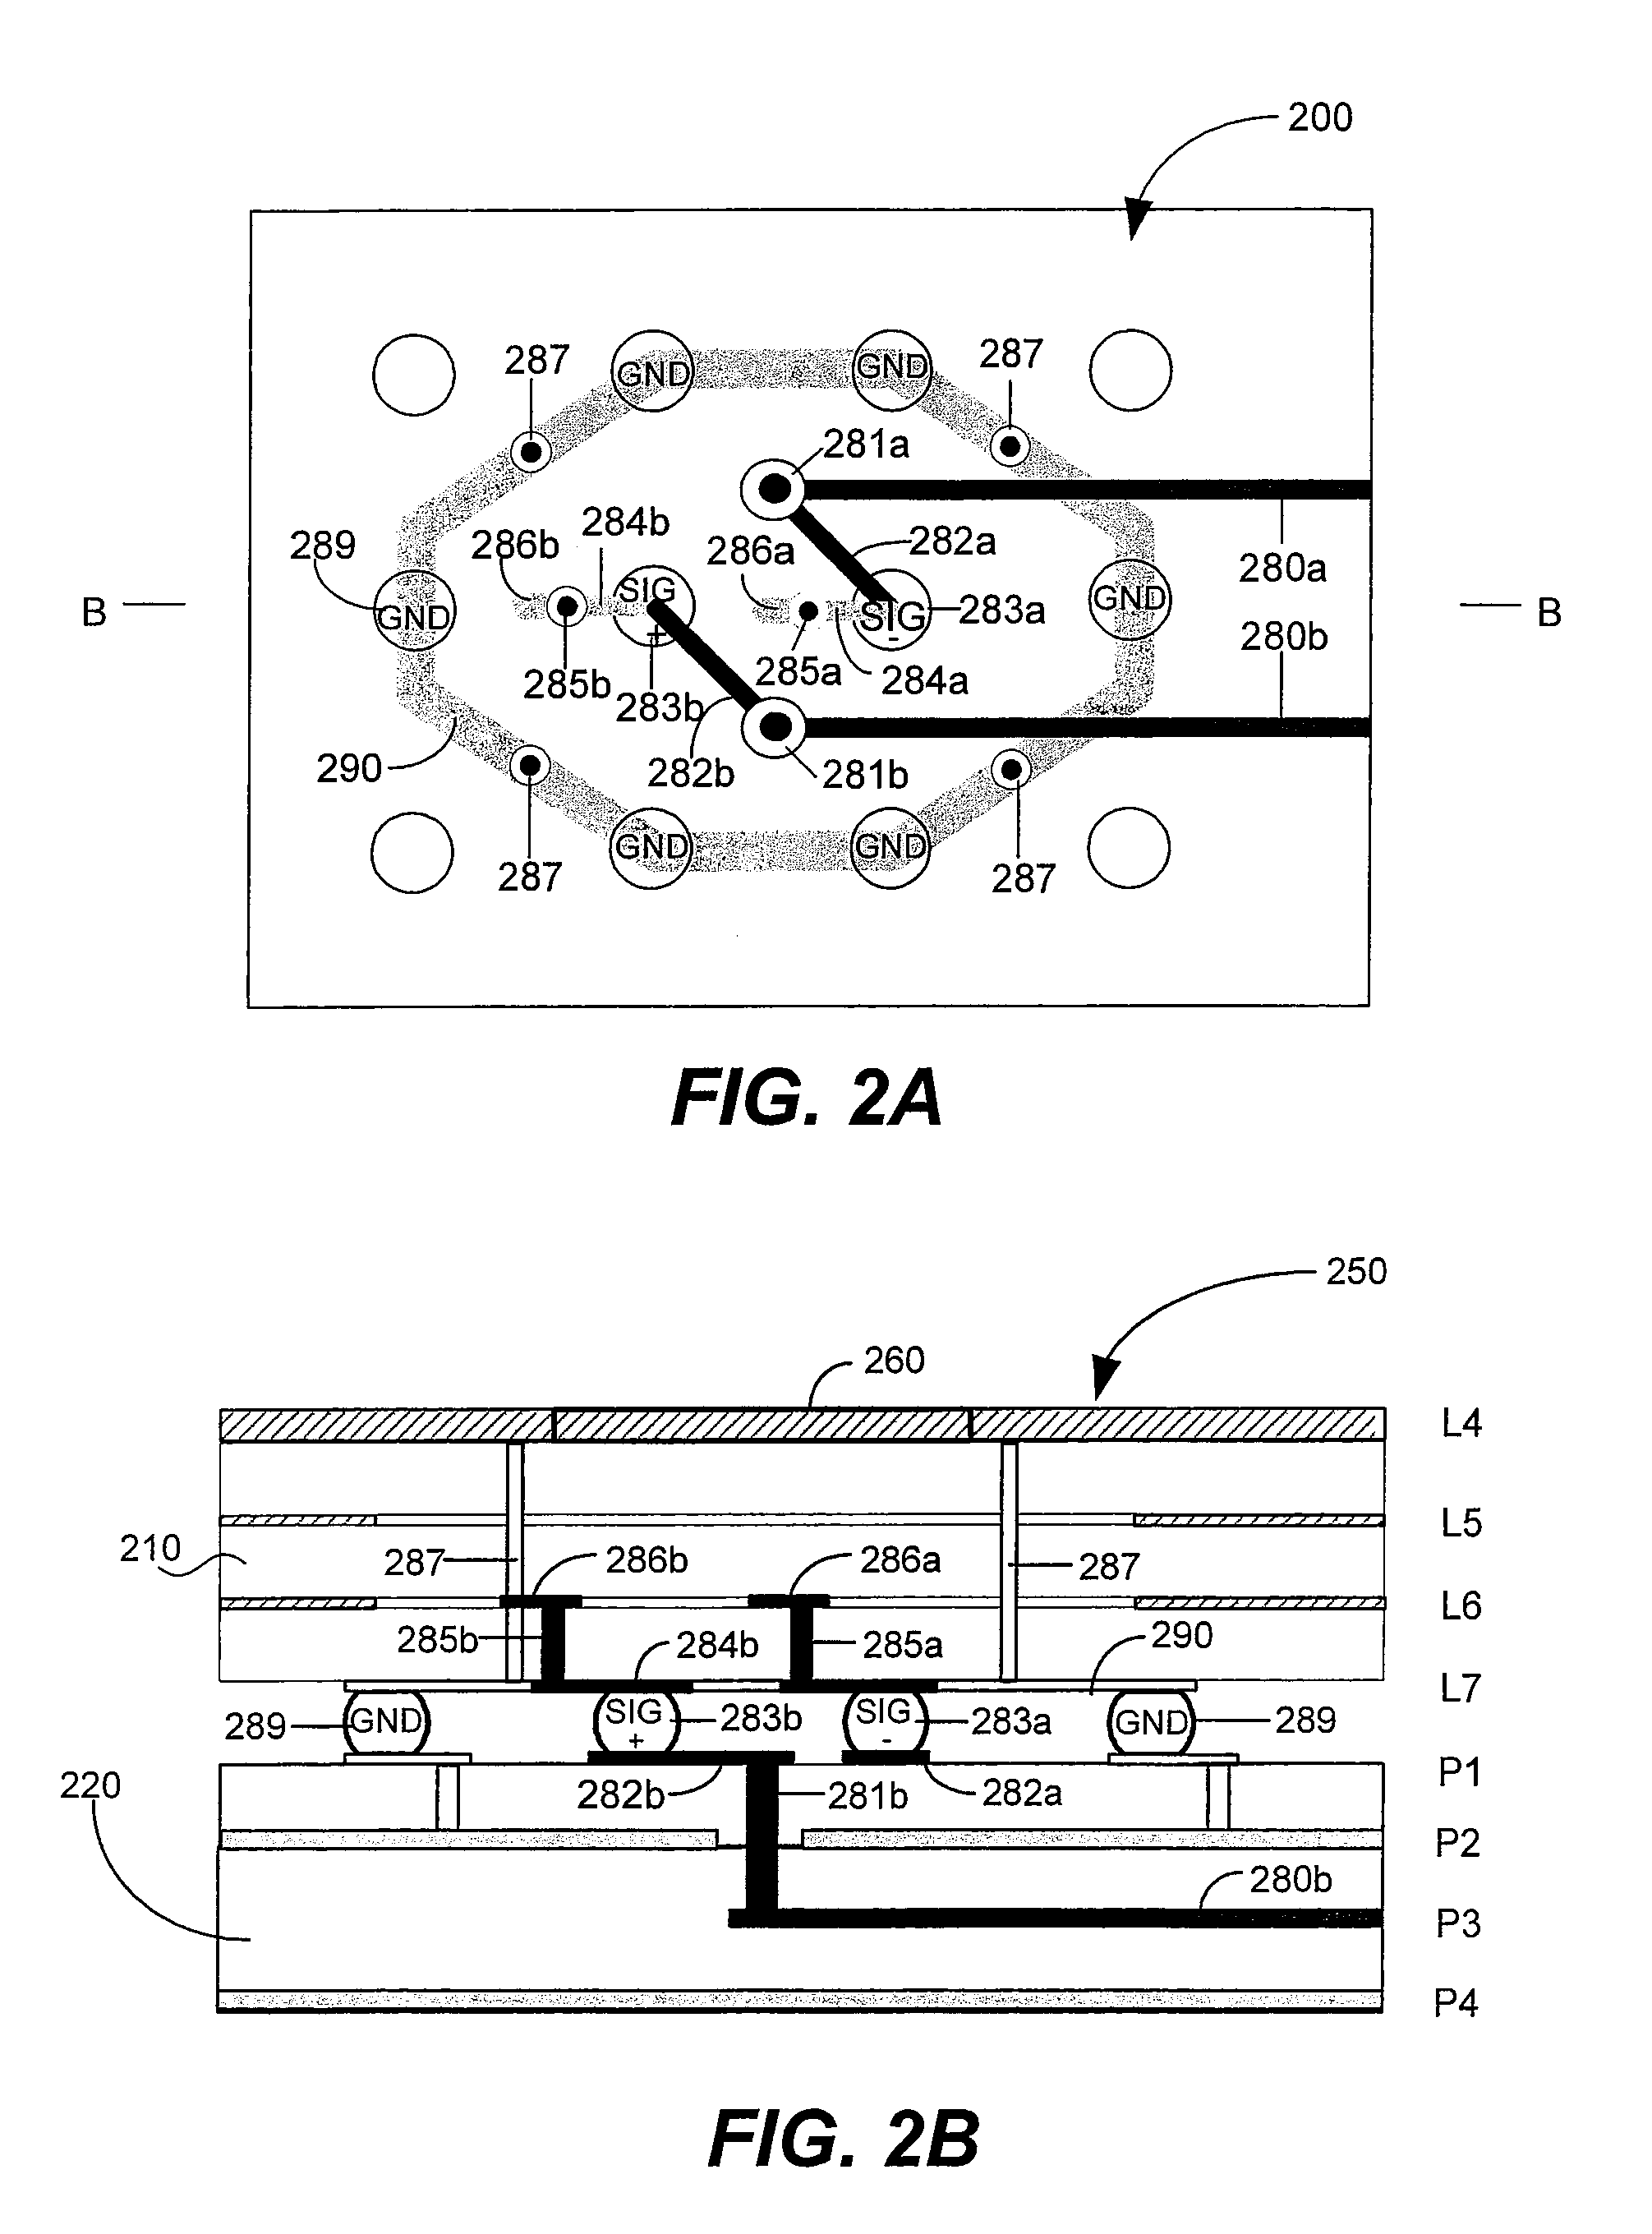 Ball grid array package-to-board interconnect co-design apparatus